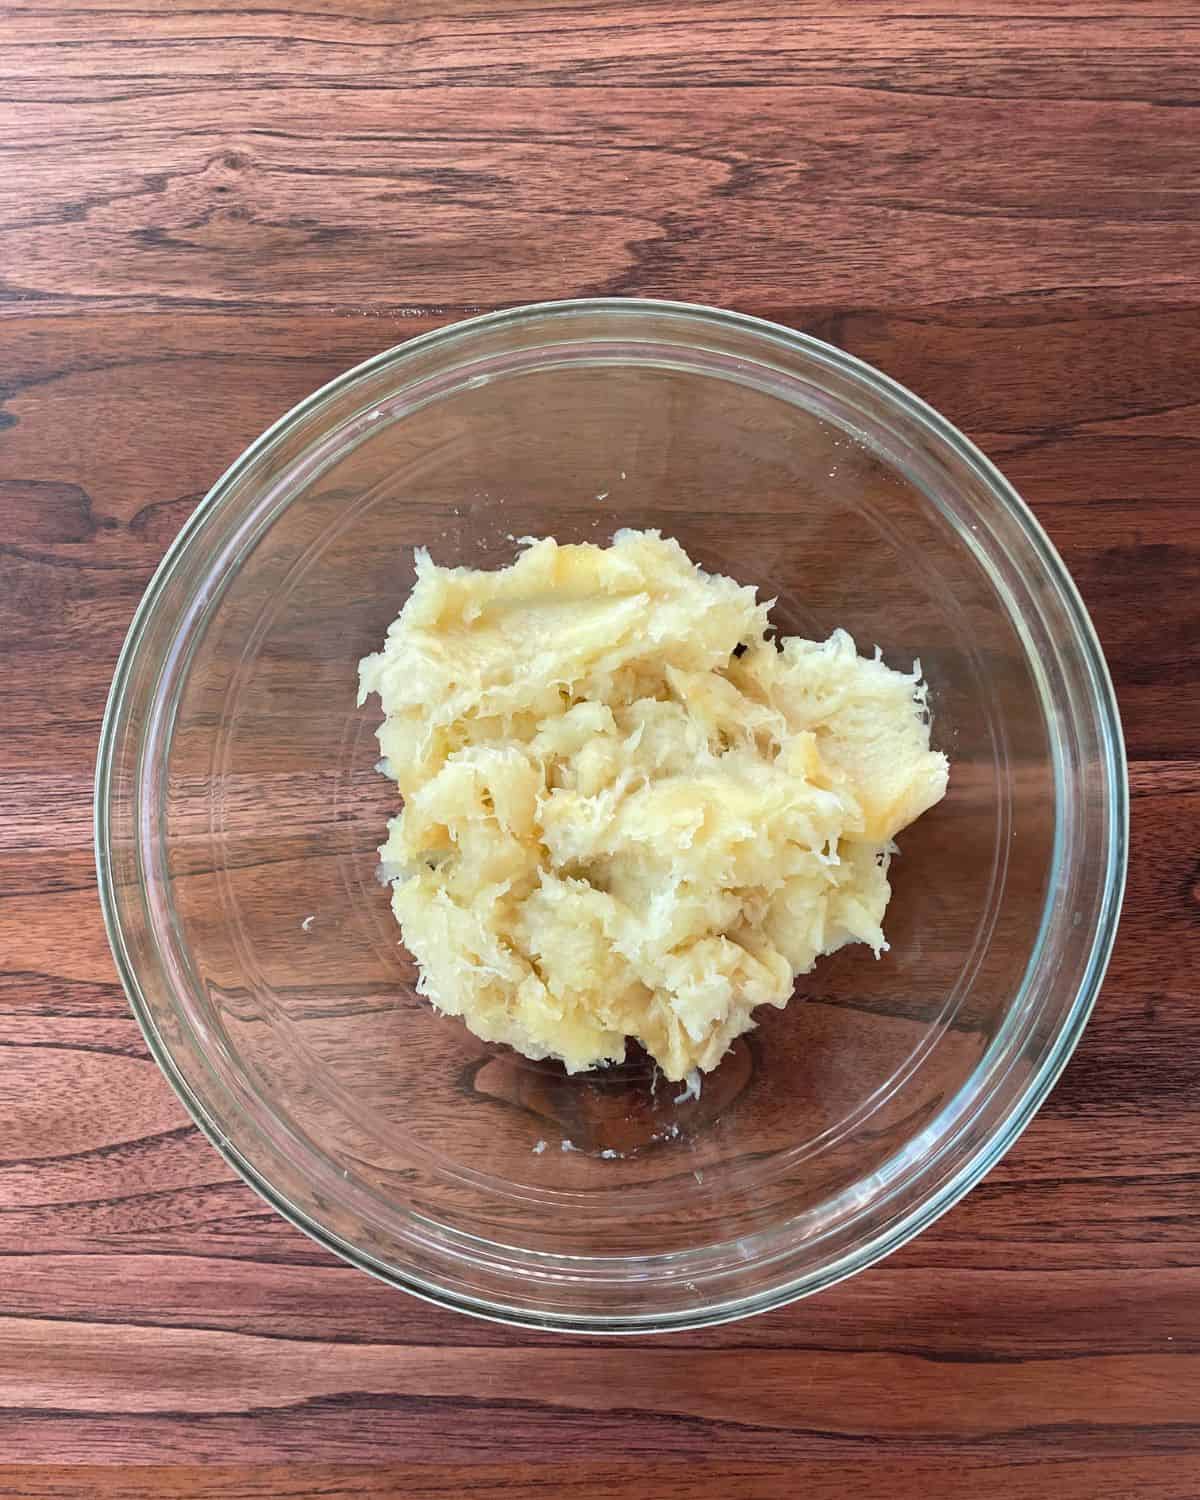 Cooked mashed potato squash scooped out of the flesh, in a glass mixing bowl.